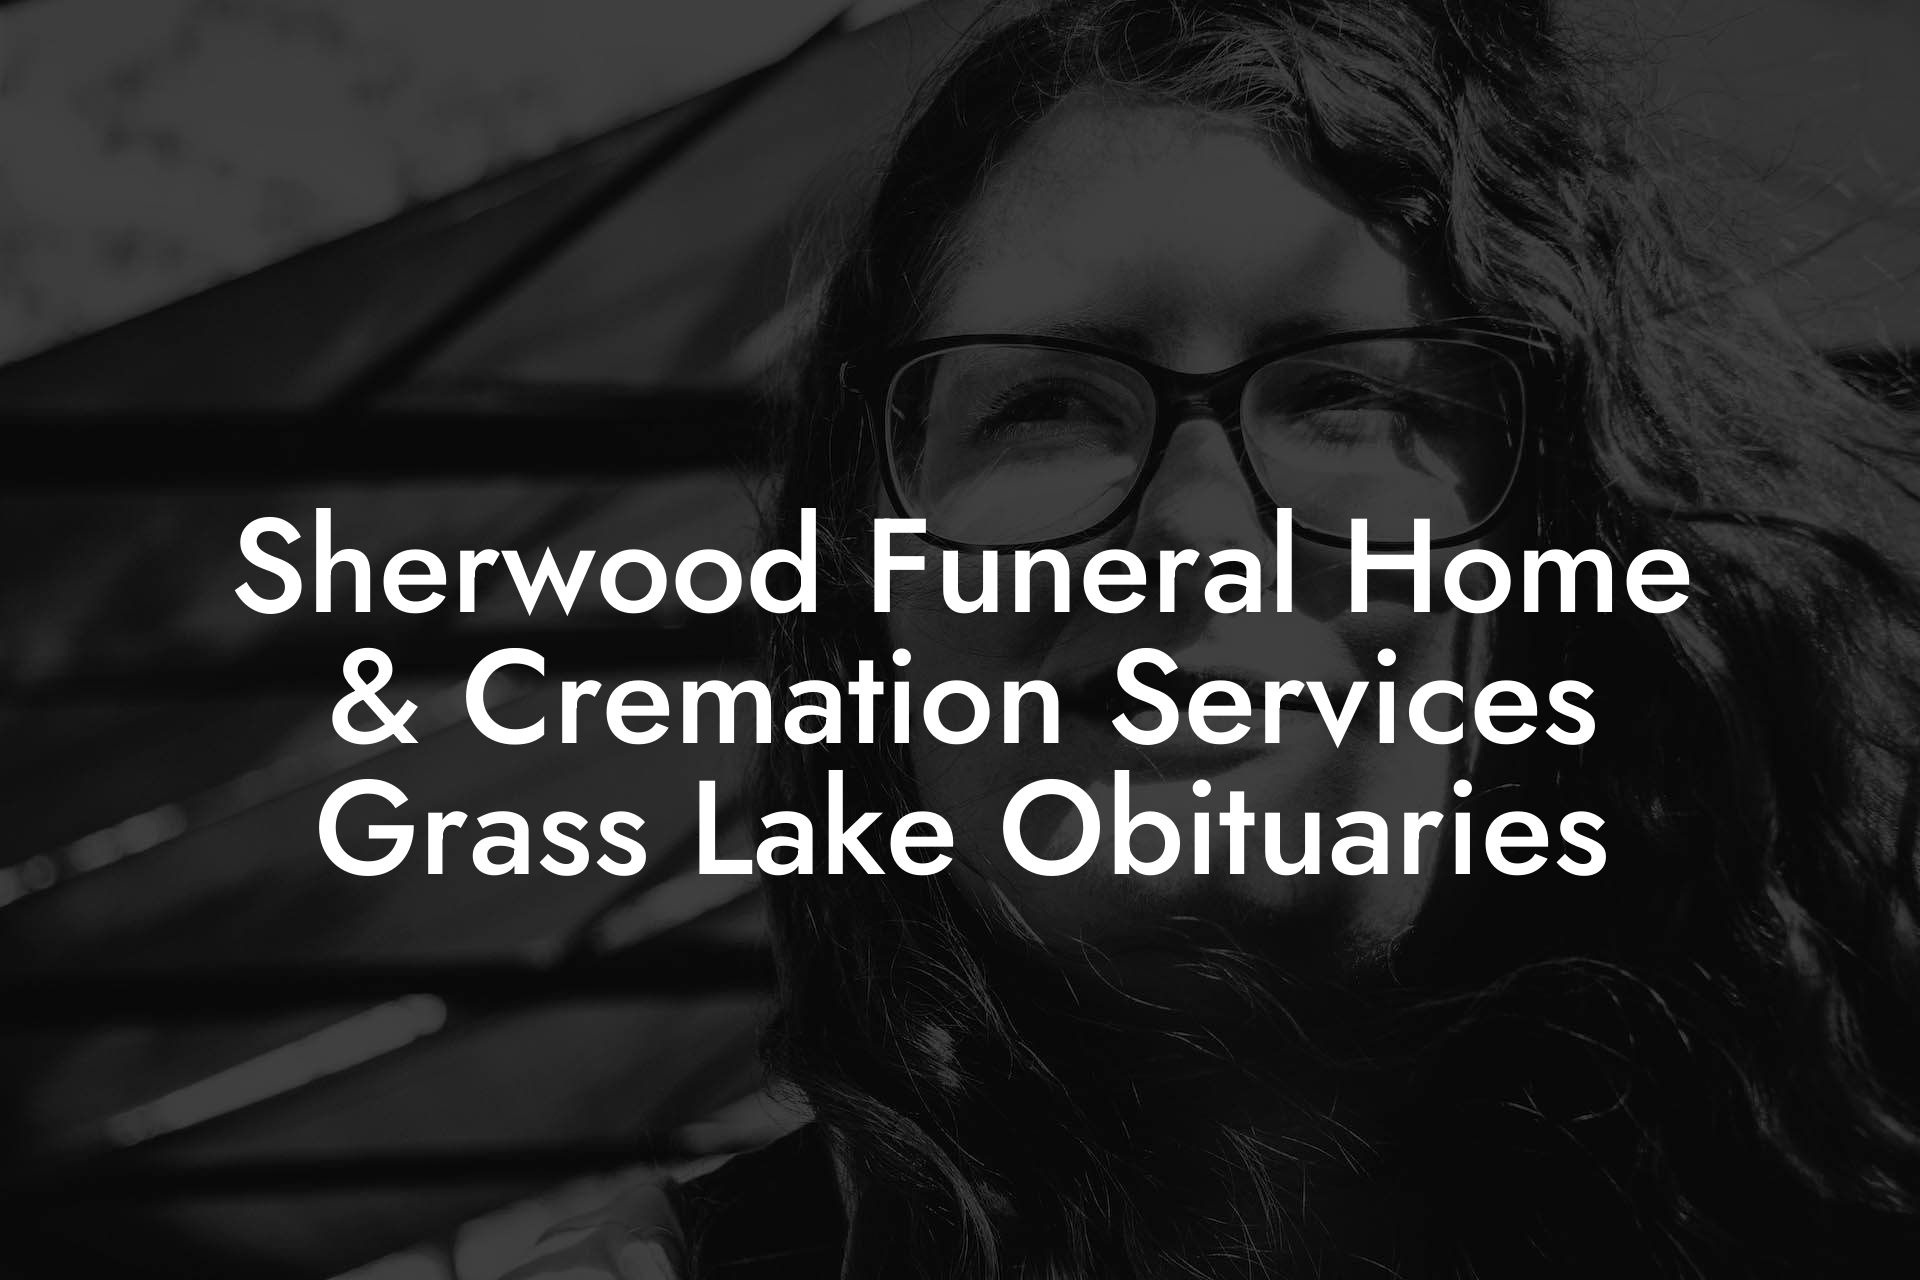 Sherwood Funeral Home & Cremation Services Grass Lake Obituaries